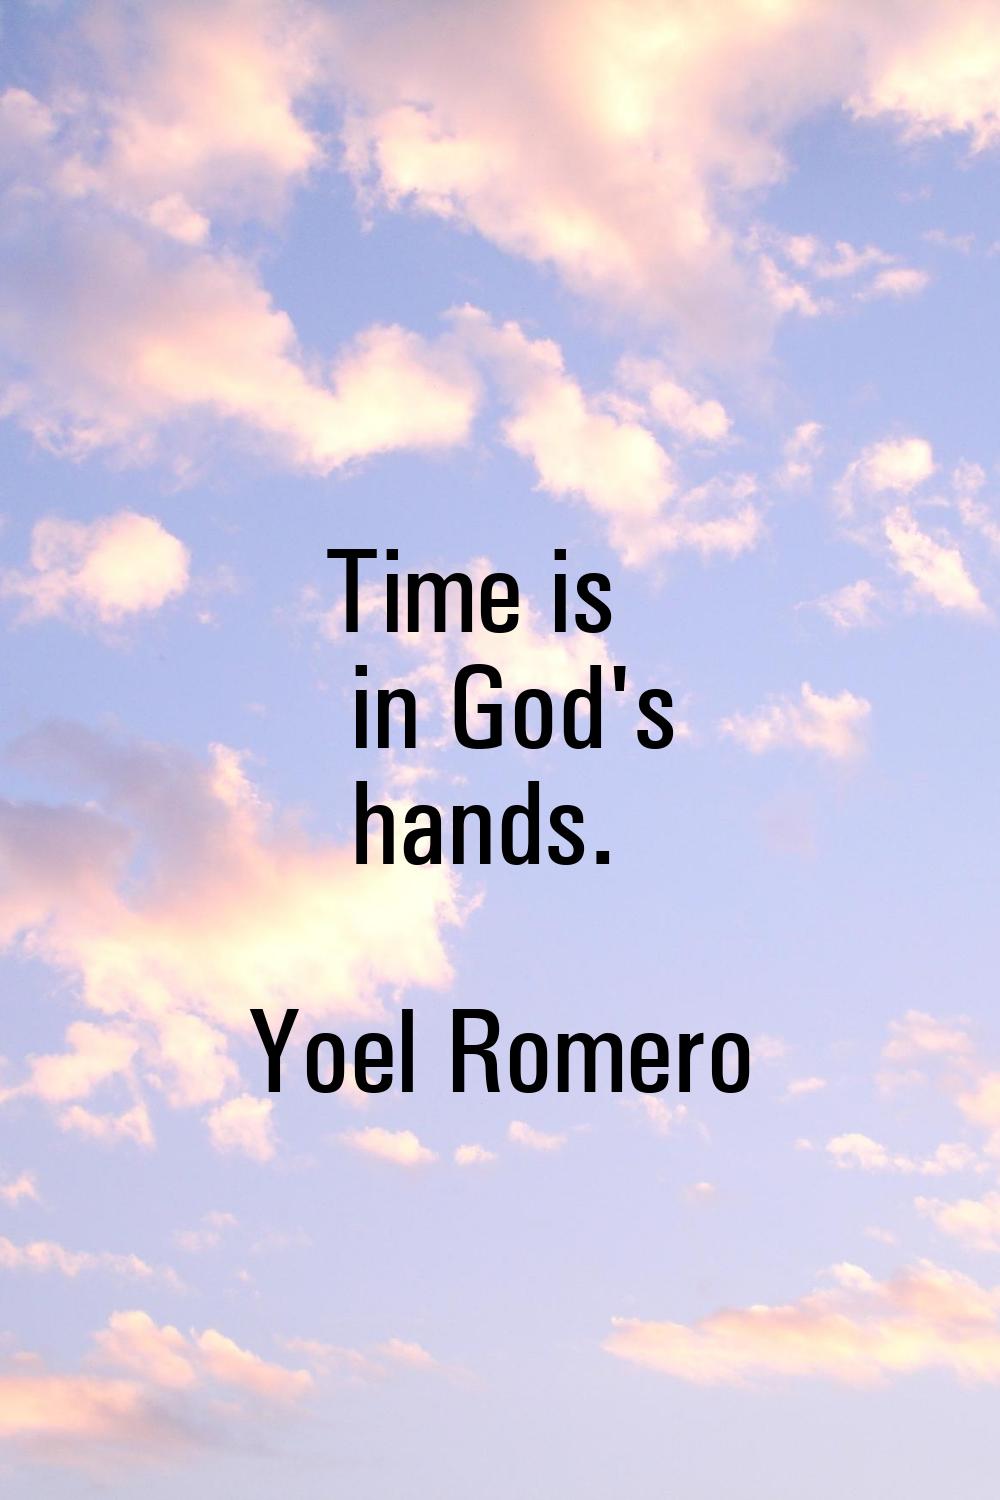 Time is in God's hands.